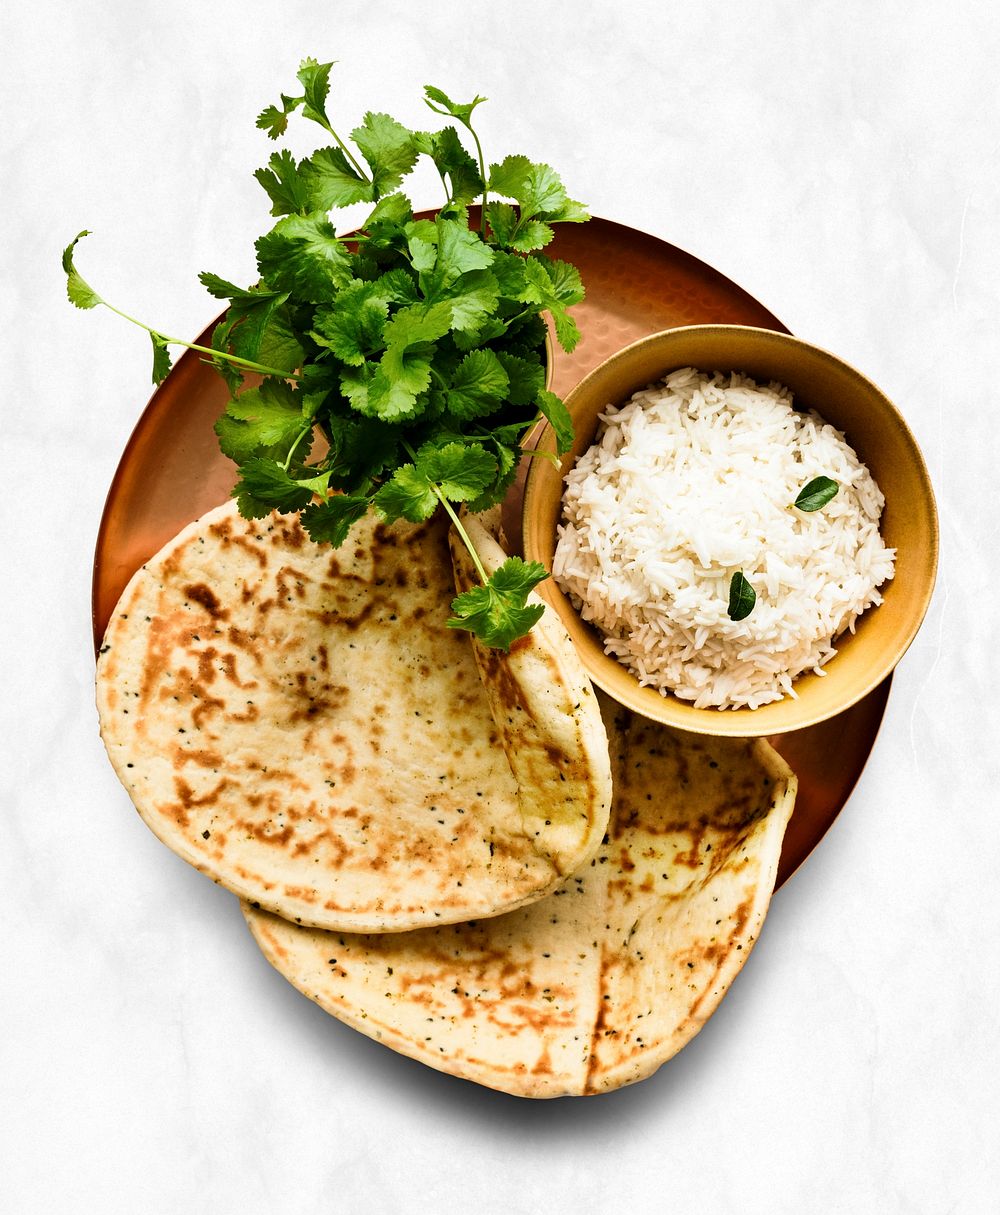 Flatbread and rice home cooked Indian food photography